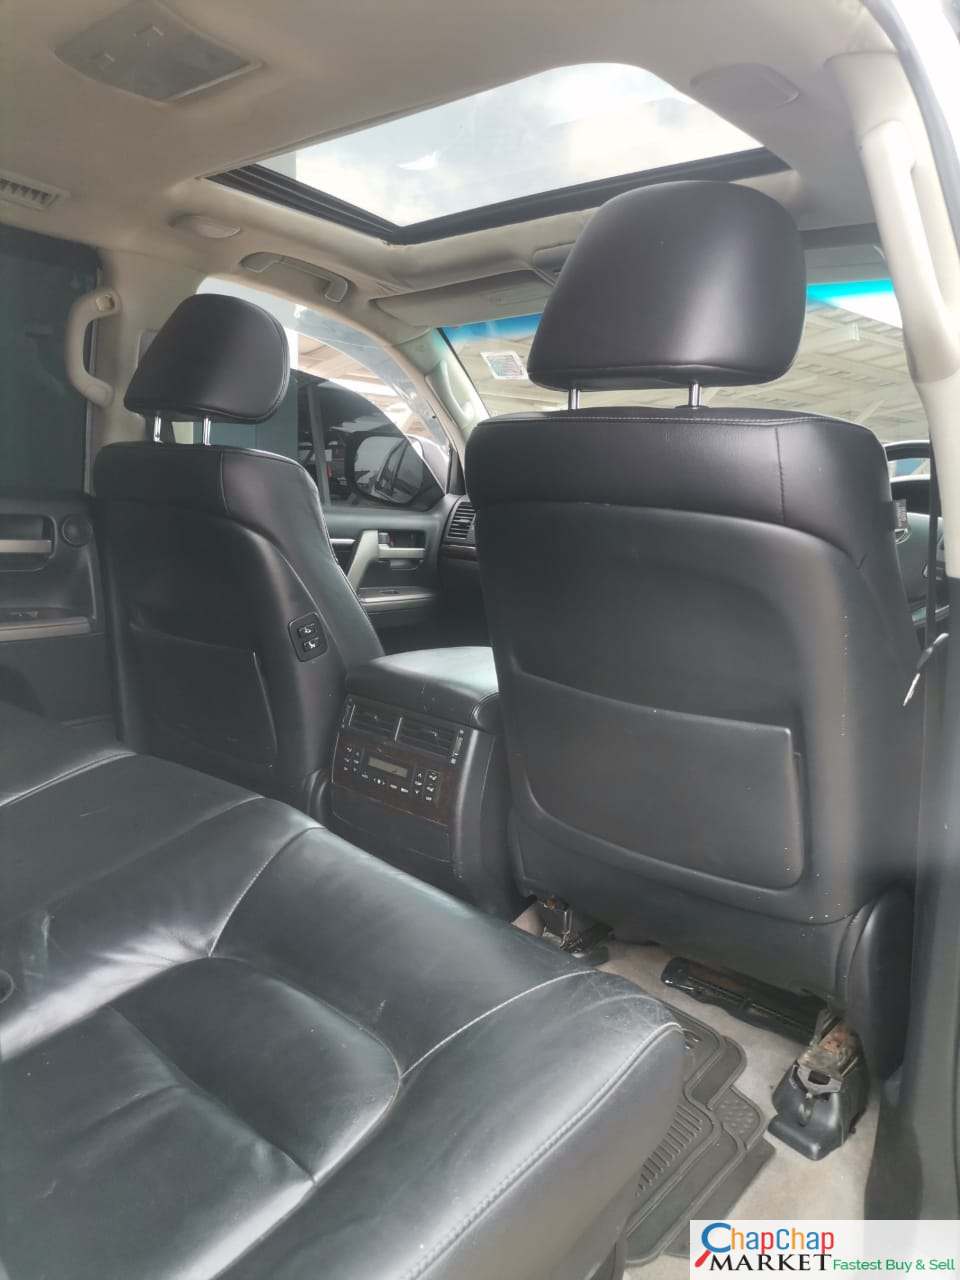 Toyota Land cruiser V8 VX SUNROOF CHEAPEST leather You Pay 30% DEPOSIT TRADE IN OK EXCLUSIVE